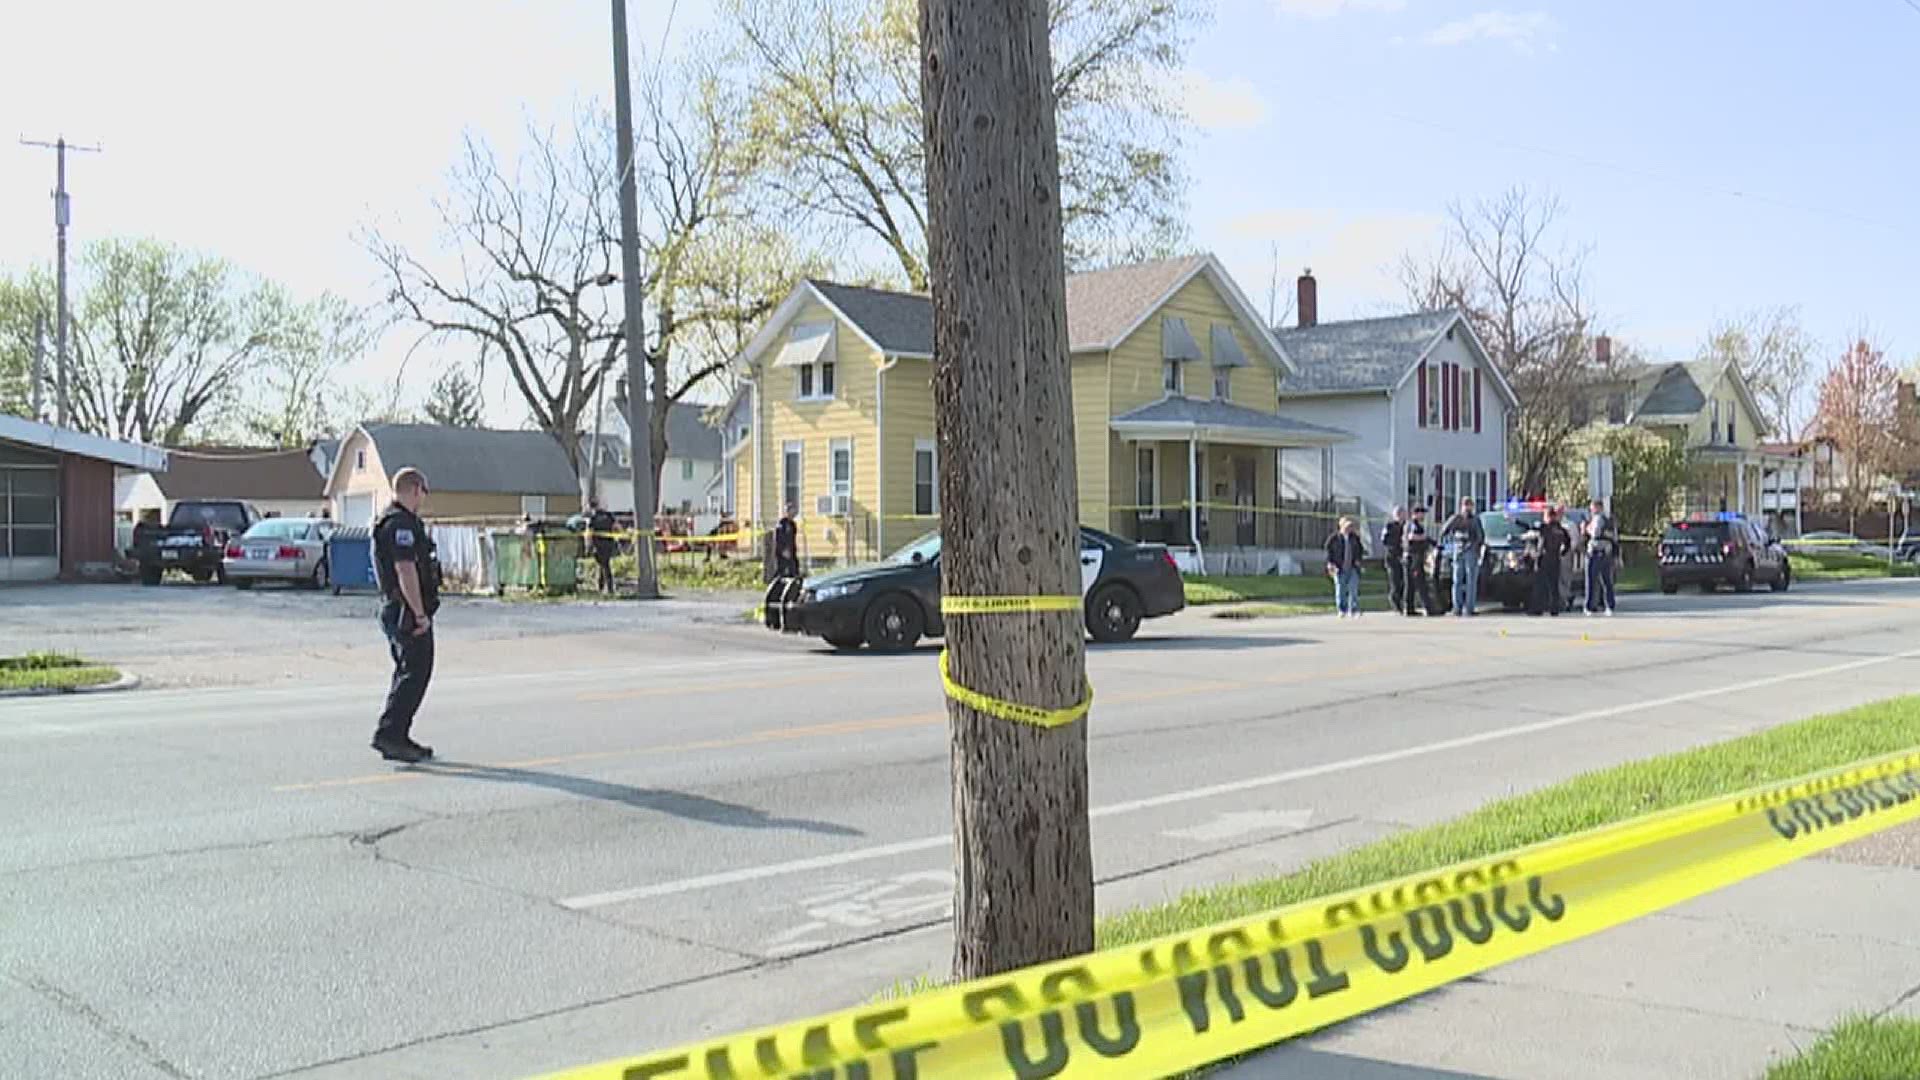 The Davenport Police Department confirmed on Friday afternoon a 12-year-old boy died in a shooting in the 1300 block of Marquette Street Thursday.